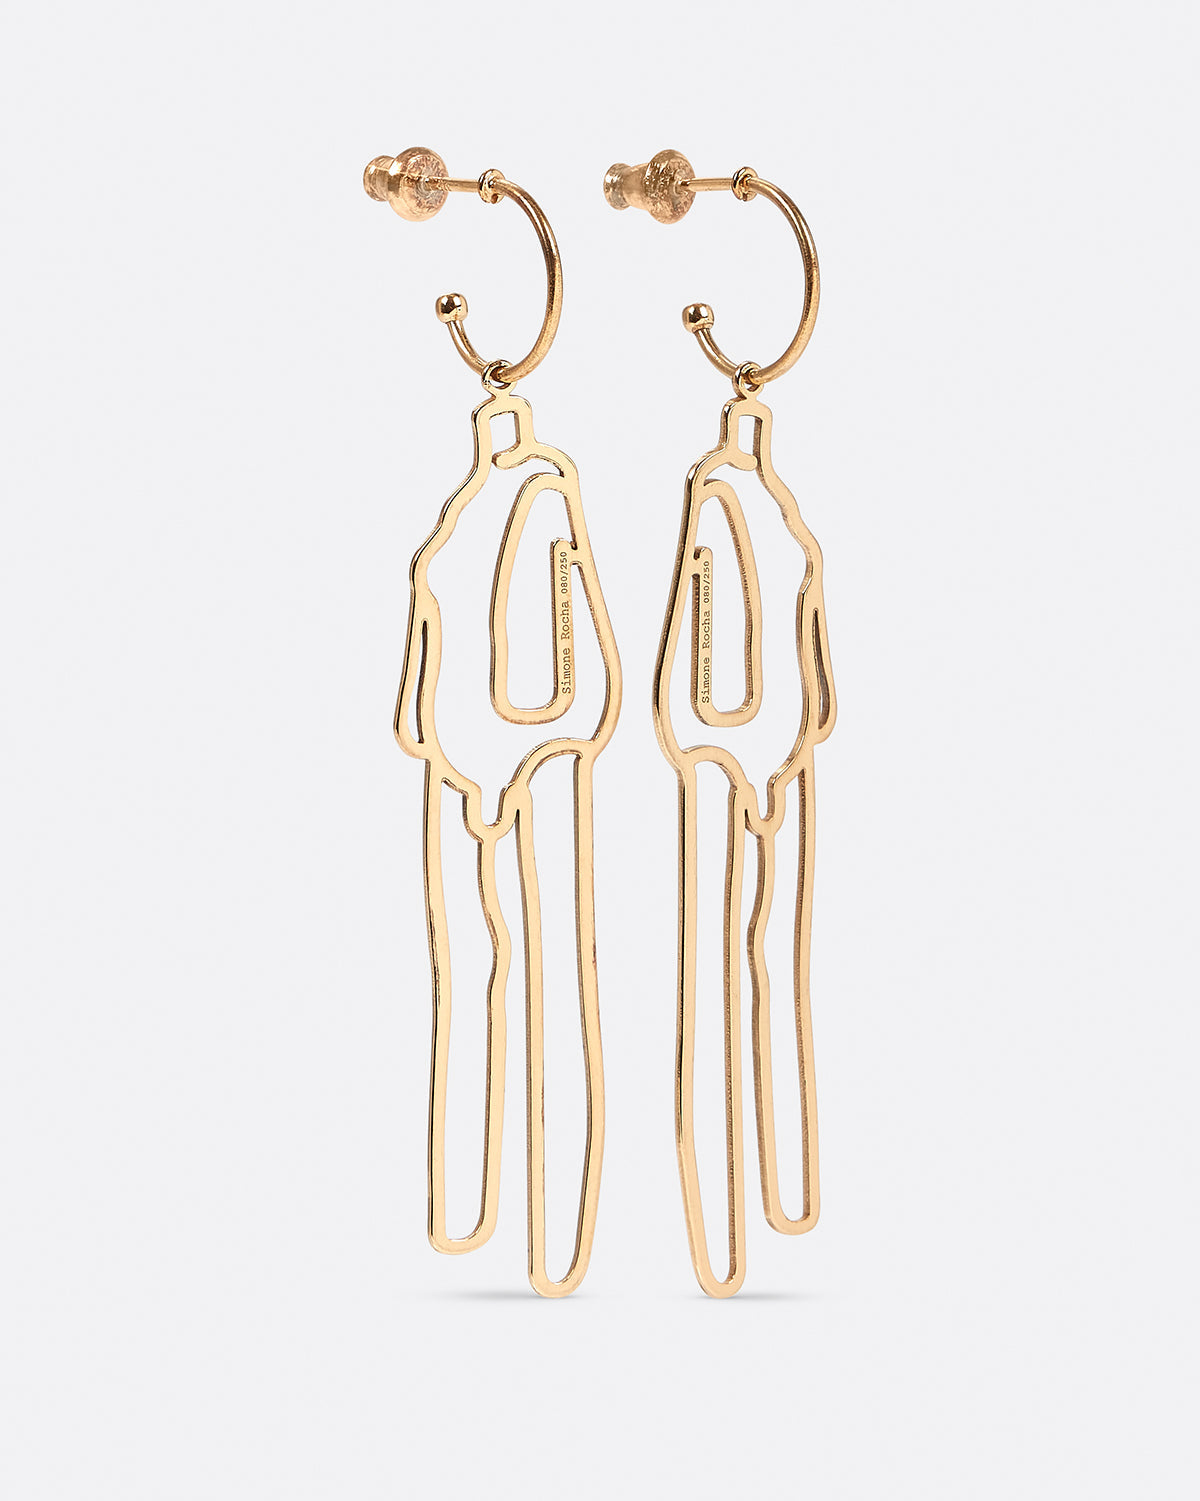 Louise Bourgeois 'Untitled' Earrings Edition